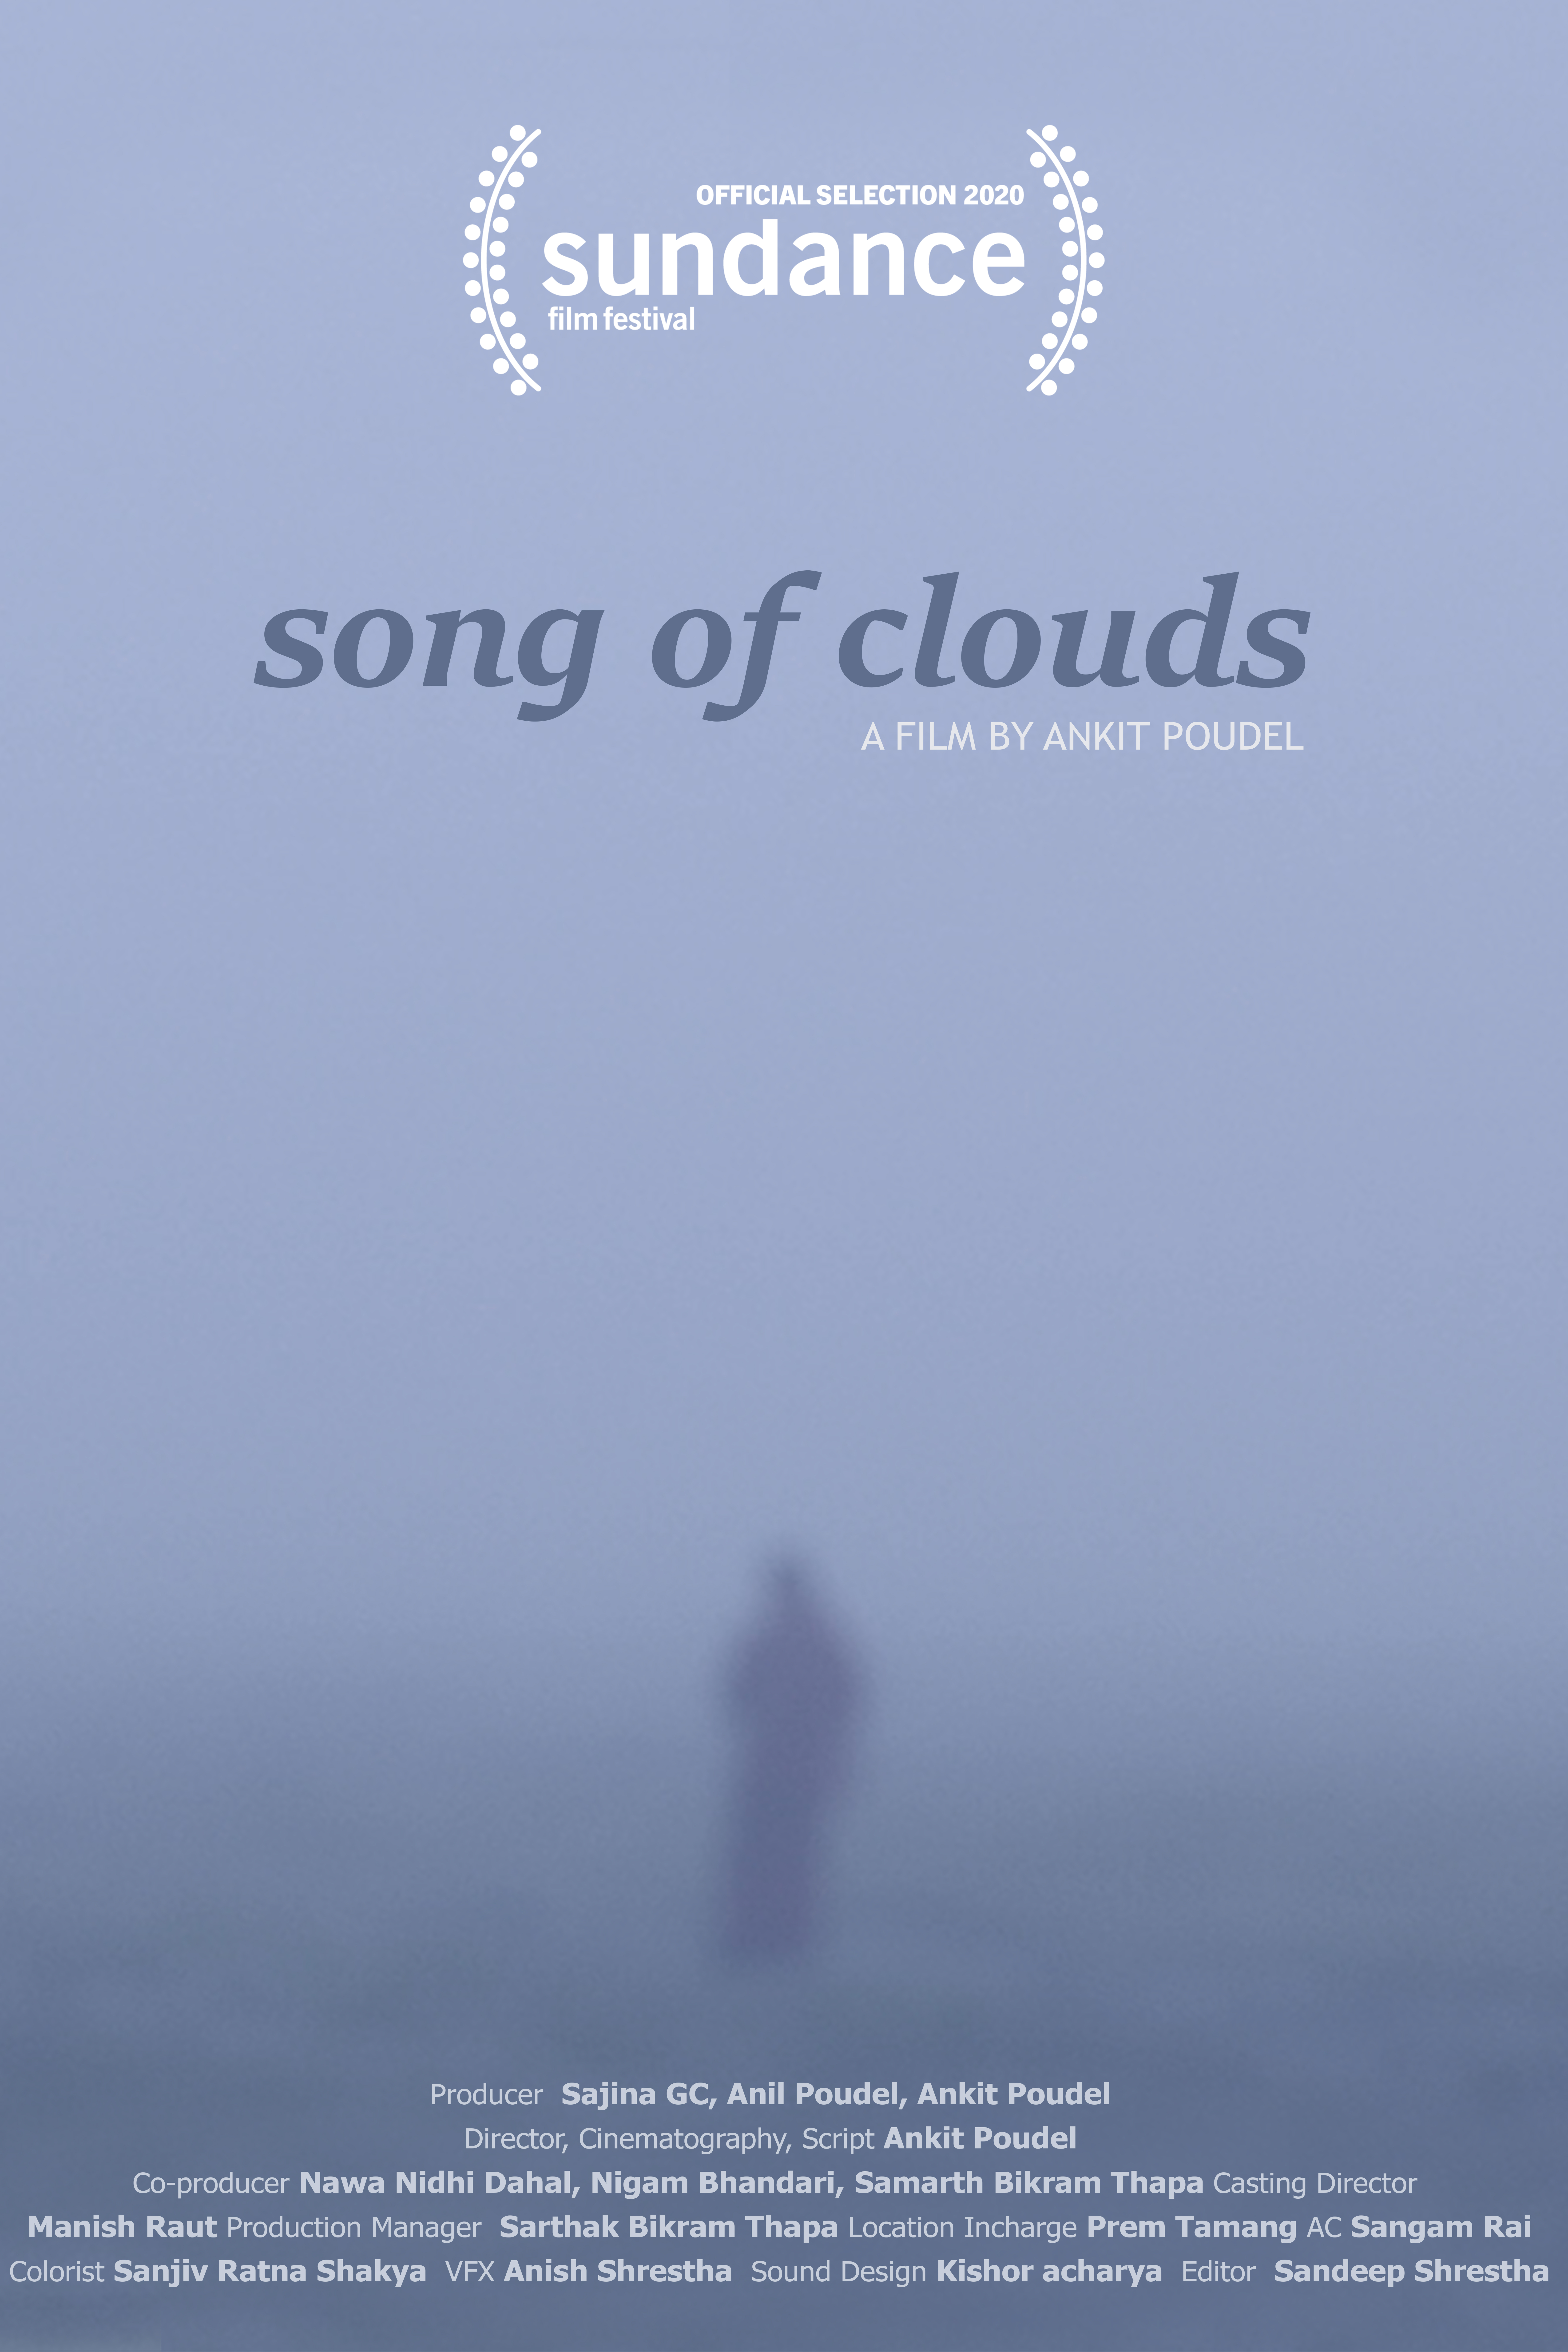 Song of Clouds